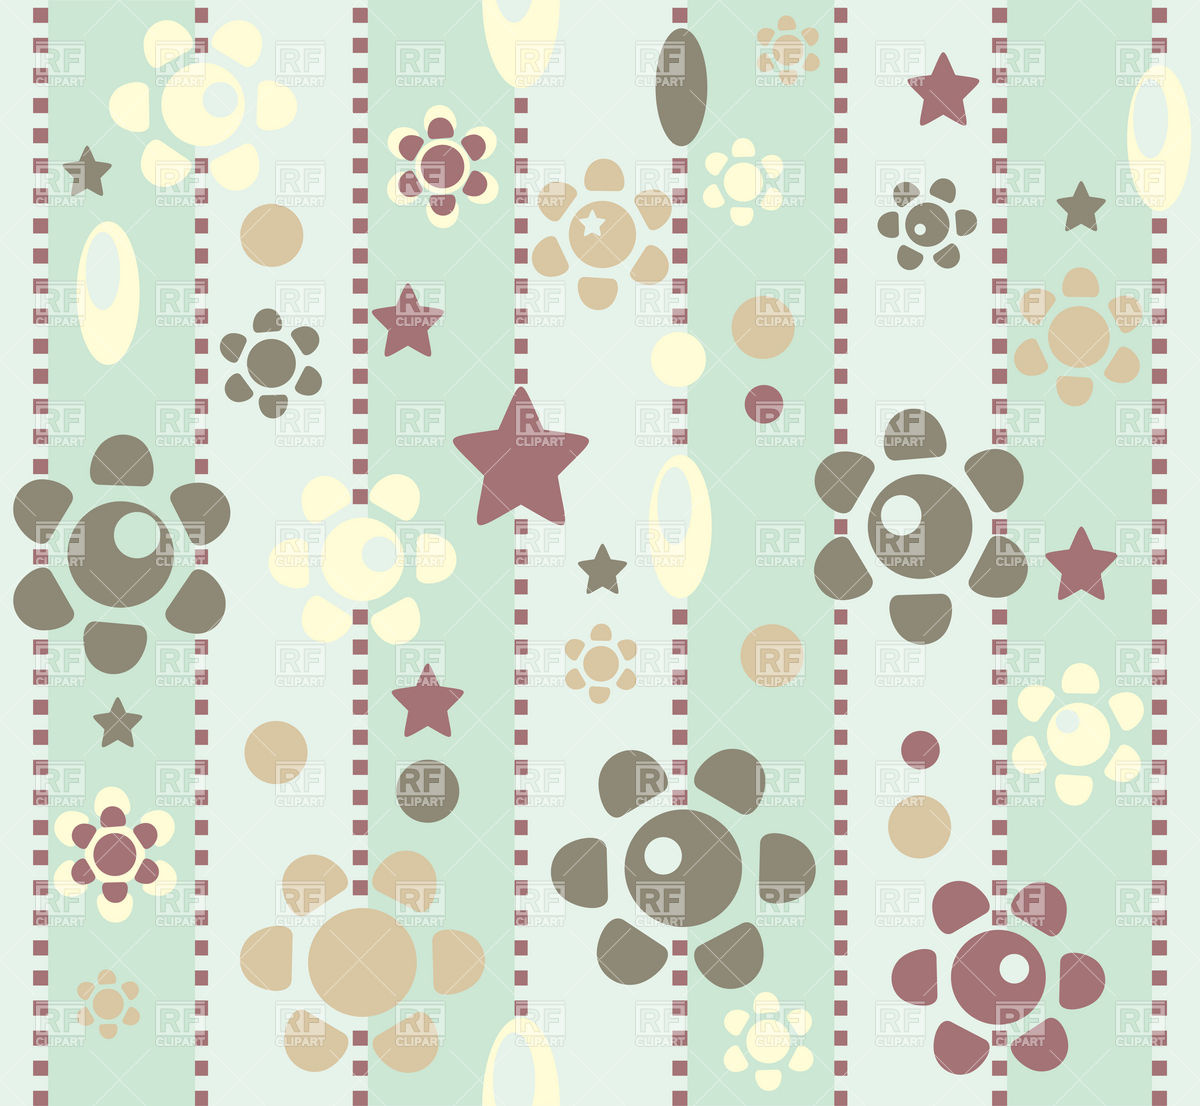 Retro Childish Pale Wallpaper With Flowers And Stars Vector Image